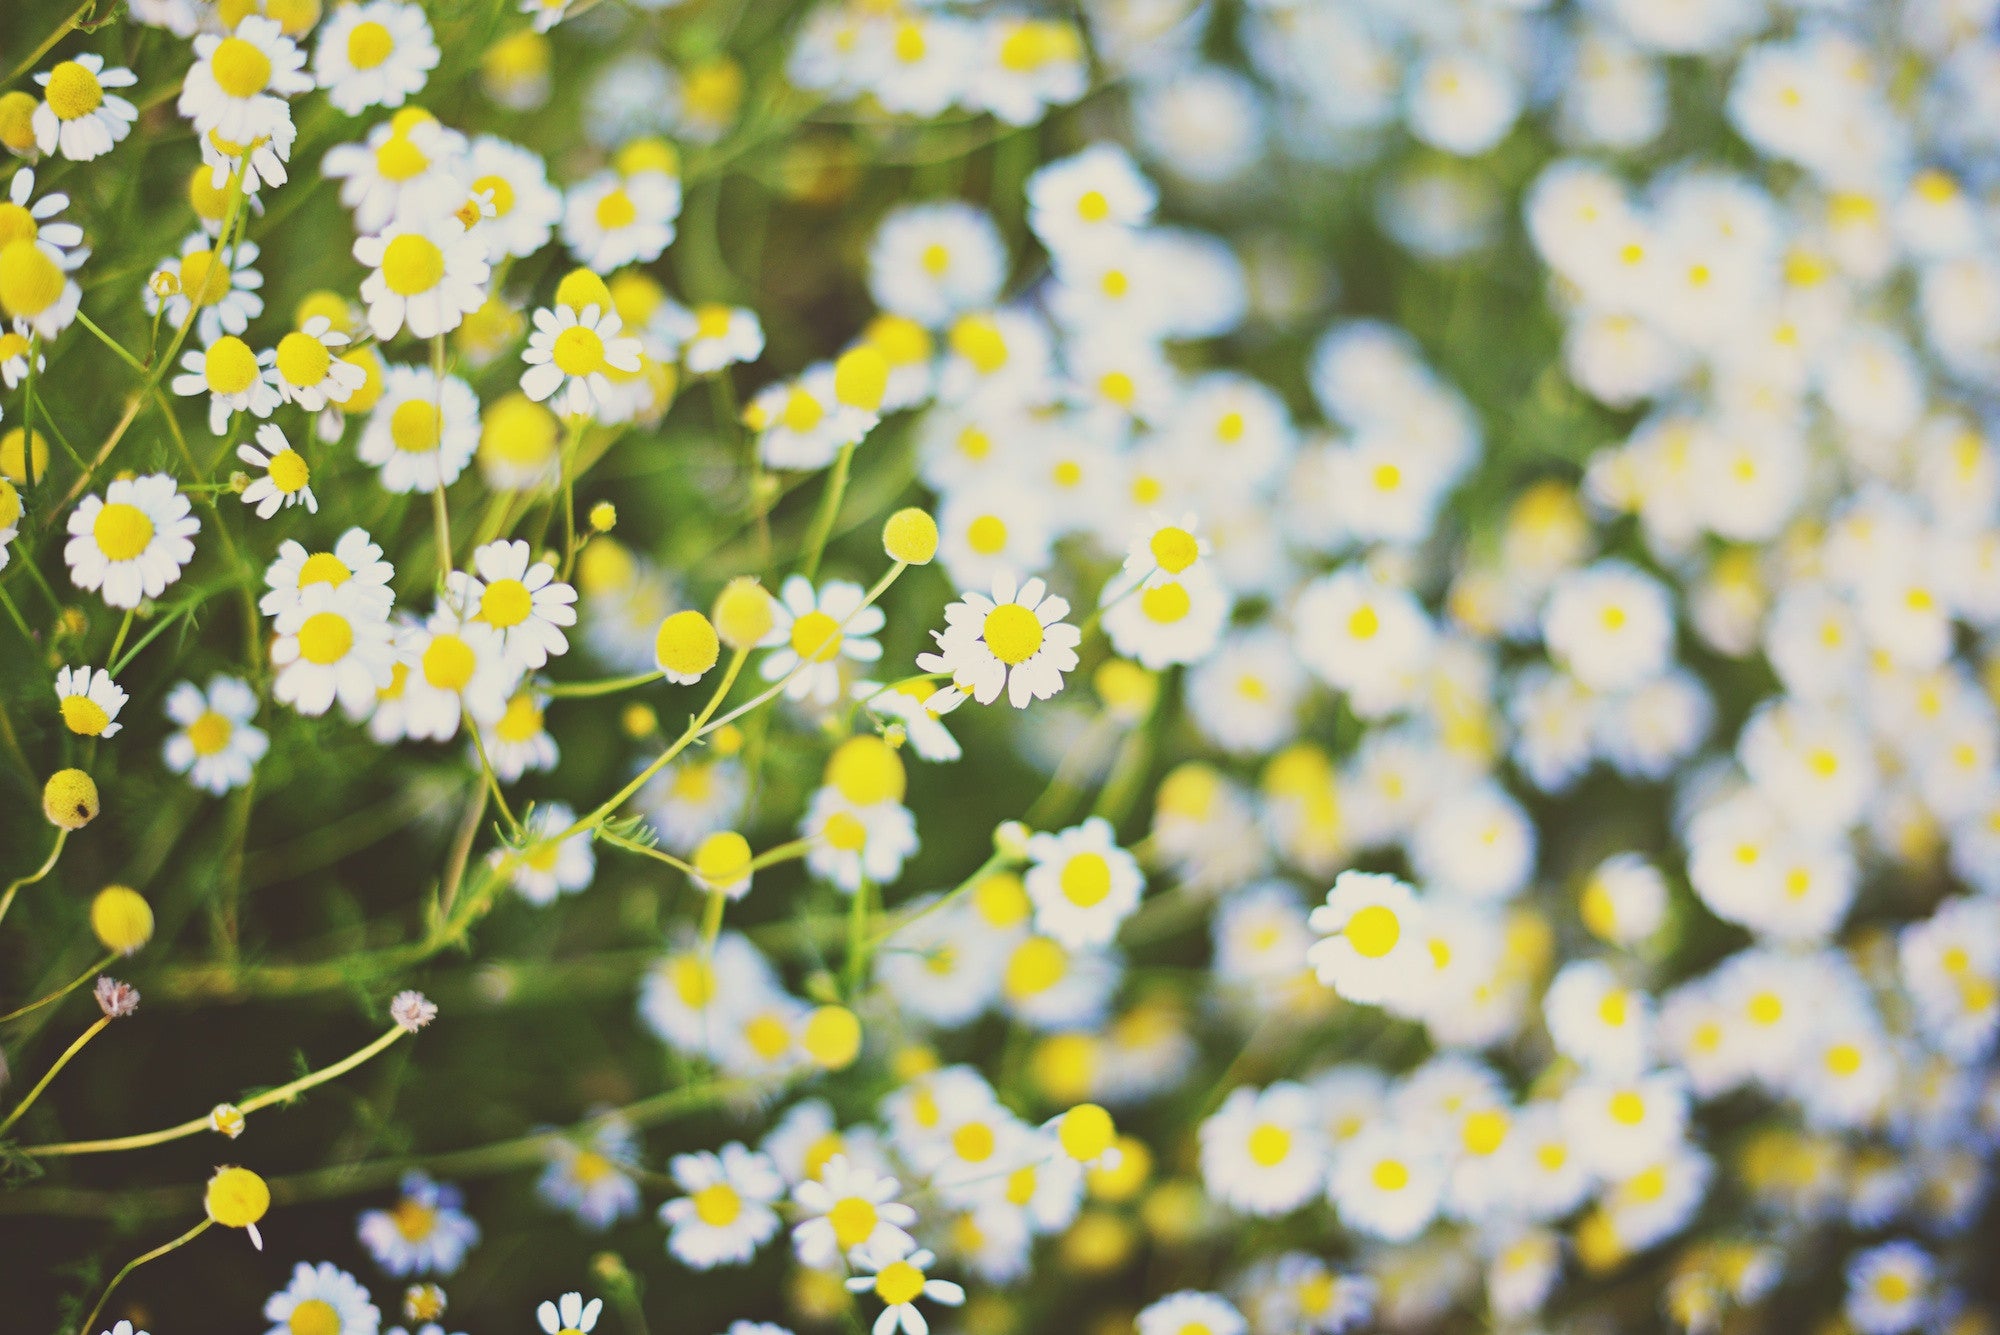 German Chamomile Flowers. Photo by Mariana Schulze.